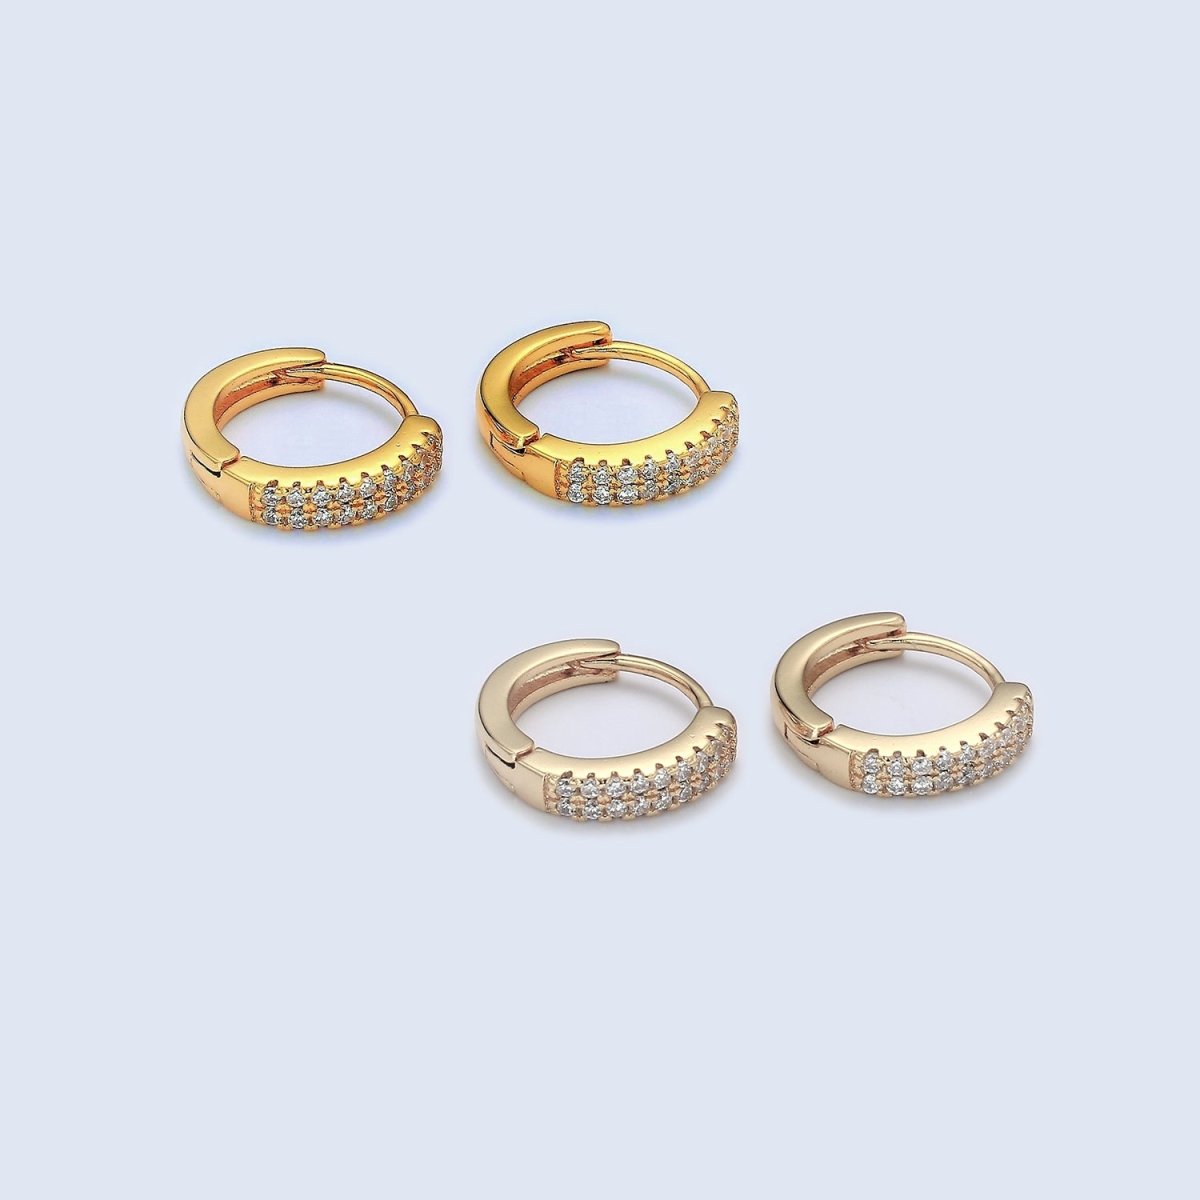 Dainty 11MM huggie hoop earrings, Small cz gold hoops with diamonds, Pavé setting small hoops, minimalist jewelry with open link for charm P-086 P-087 - DLUXCA